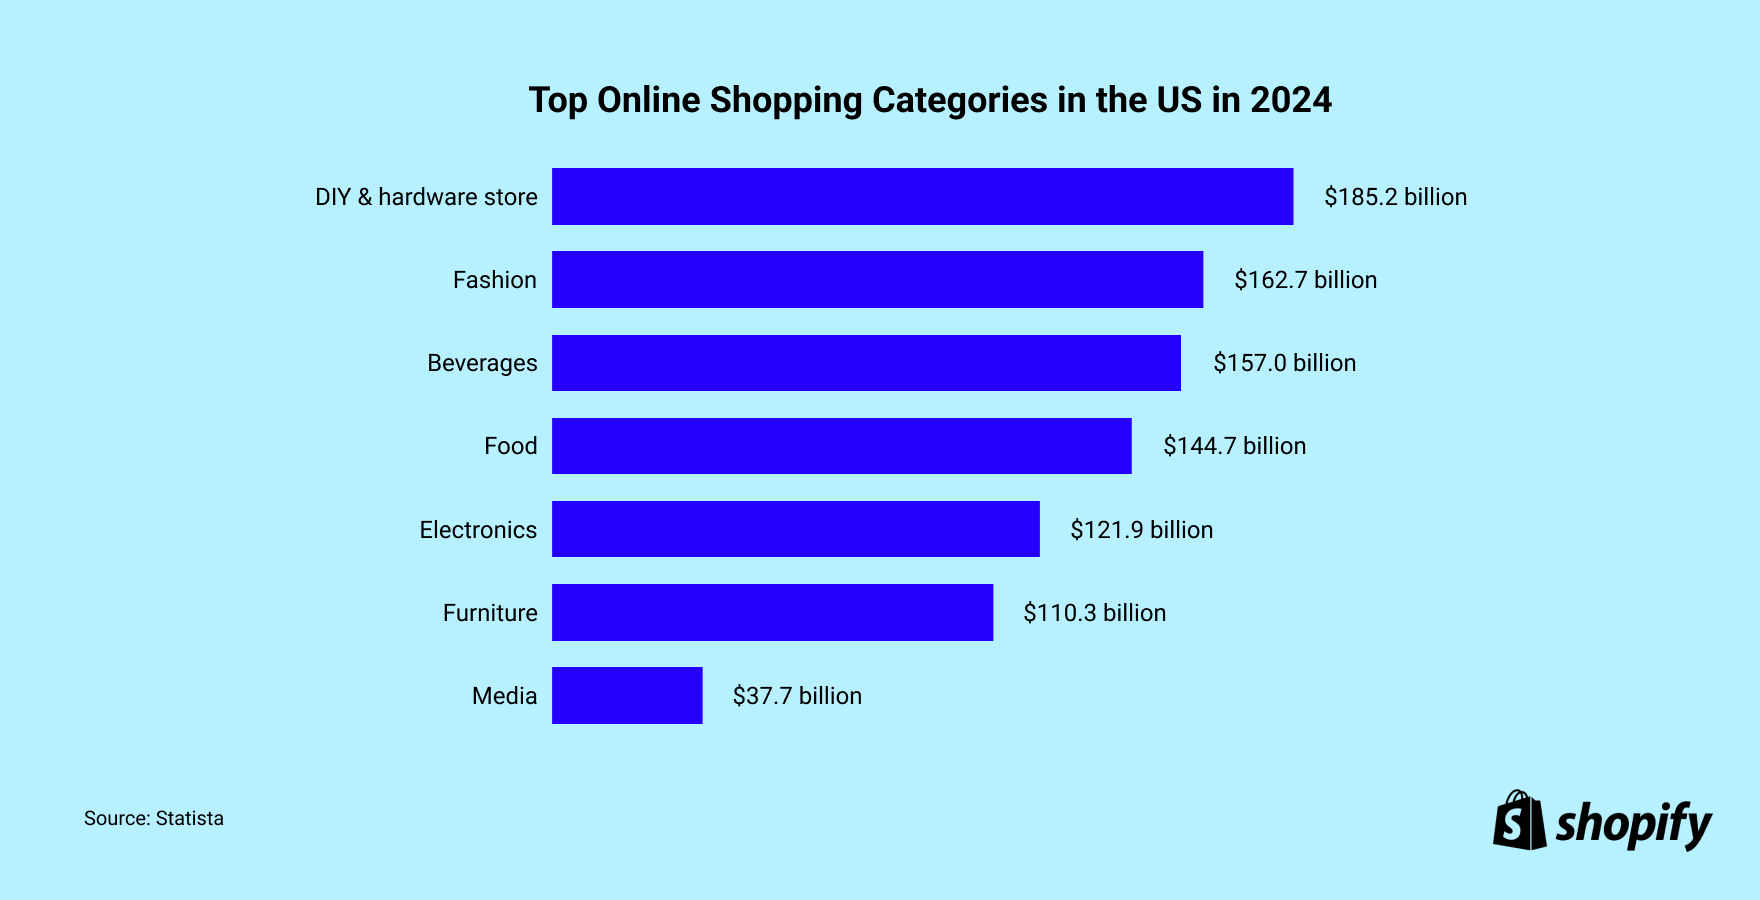 https://cdn.shopify.com/s/files/1/0070/7032/files/Top_Online_Shopping_Categories_in_the_US_in_2024.png?v=1701775583